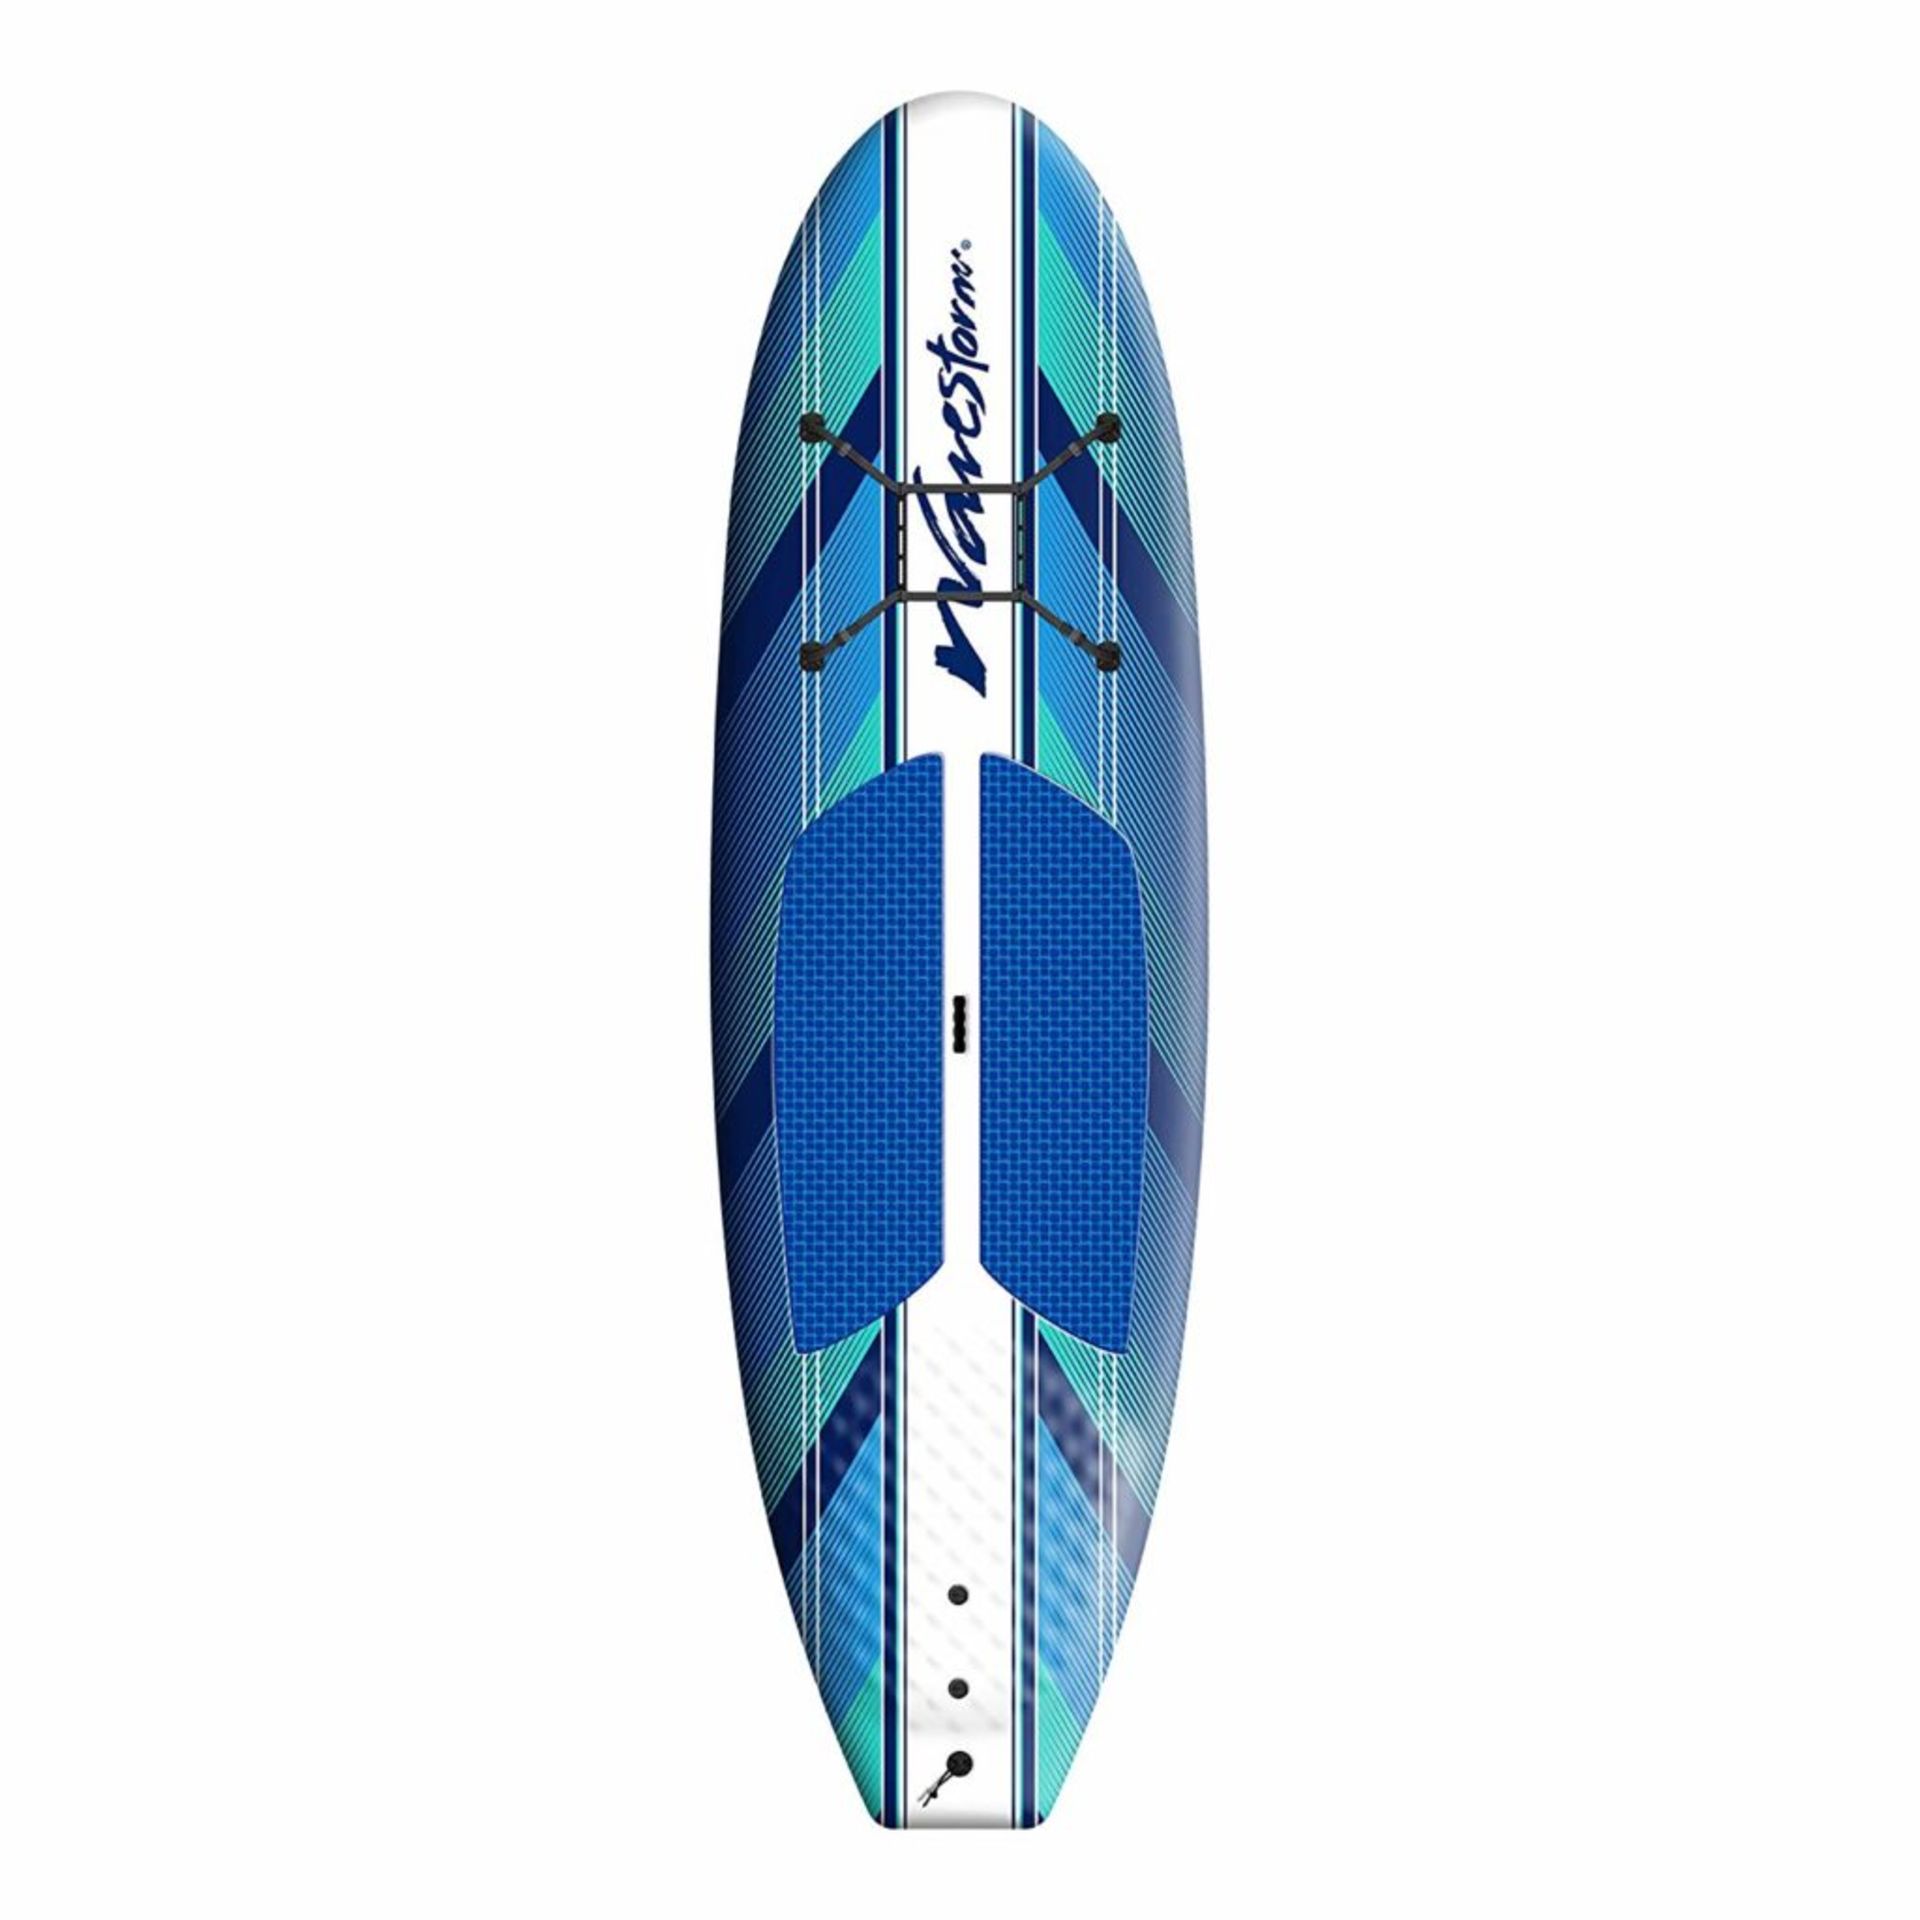 1 WAVESTORM 9FT 6" STAND UP PADDLEBOARD (NO ACCESSORIES, GENERIC IMAGE) RRP £399